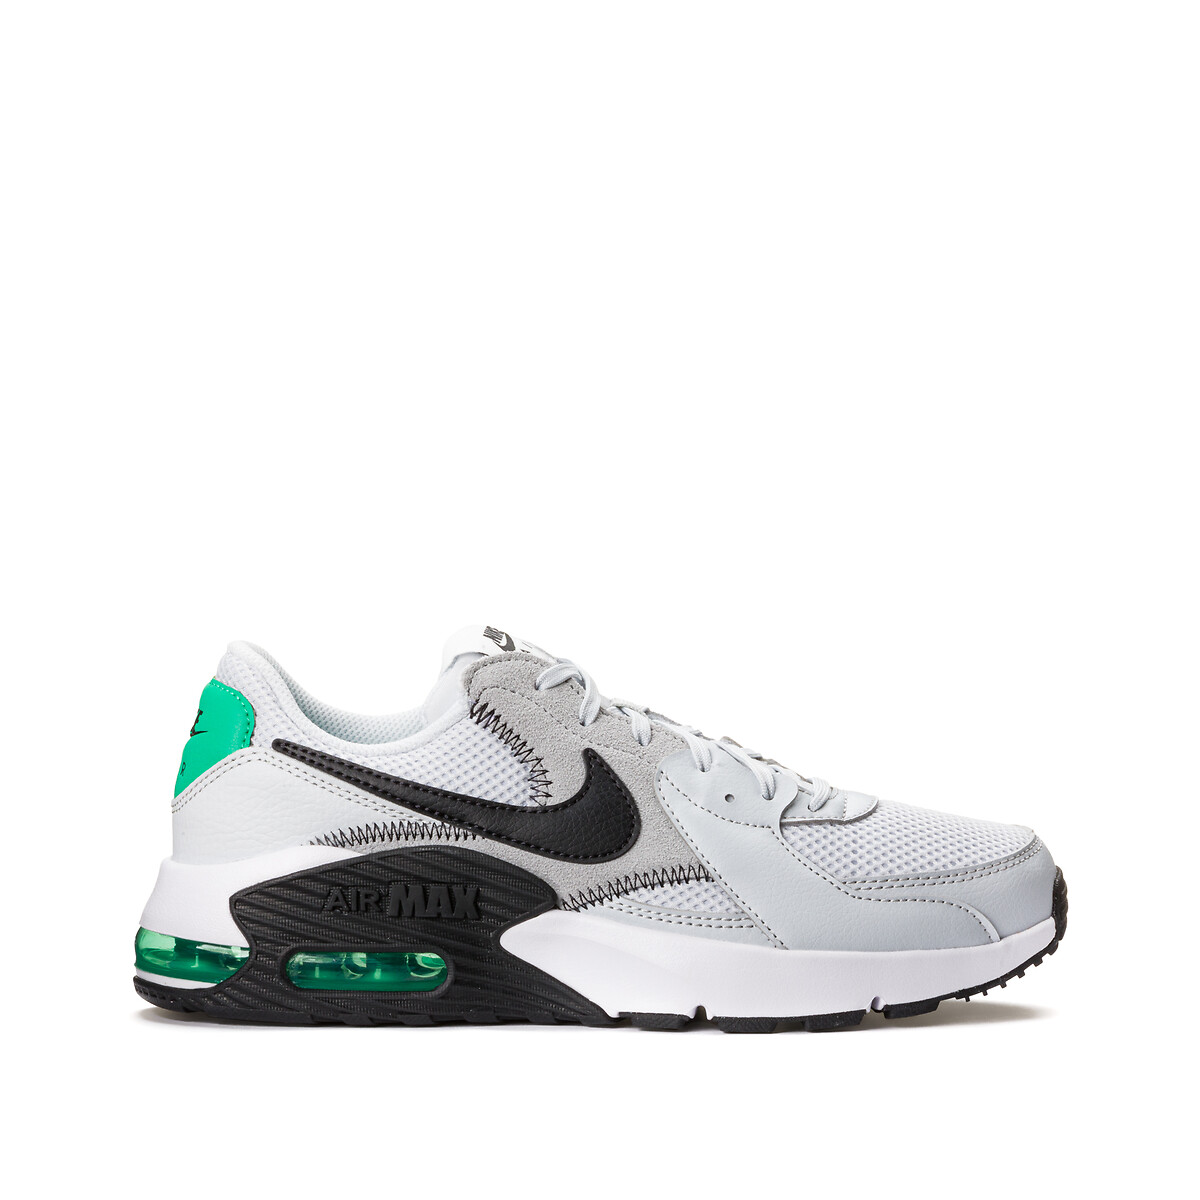 Chaussures homme Nike | La Redoute